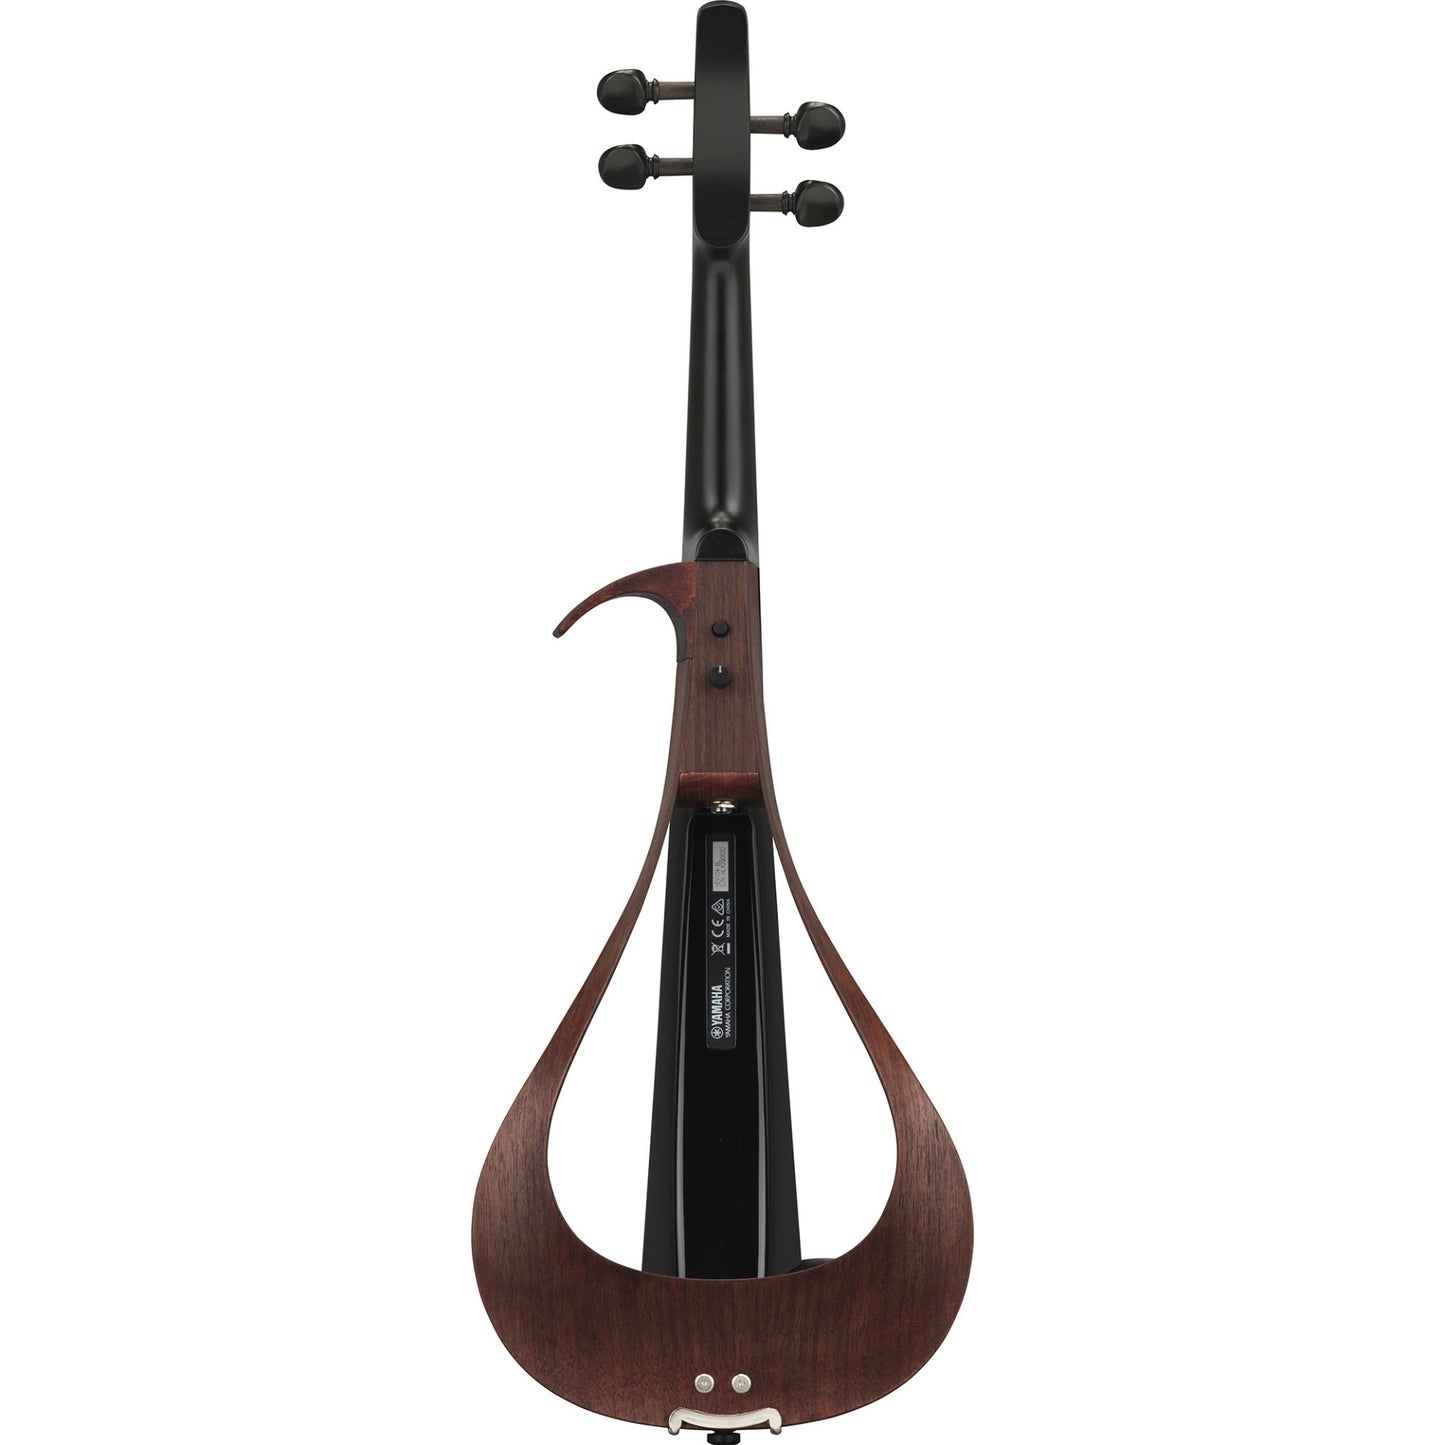 Yamaha 4 string Electric Violin in a Black Wood Finish